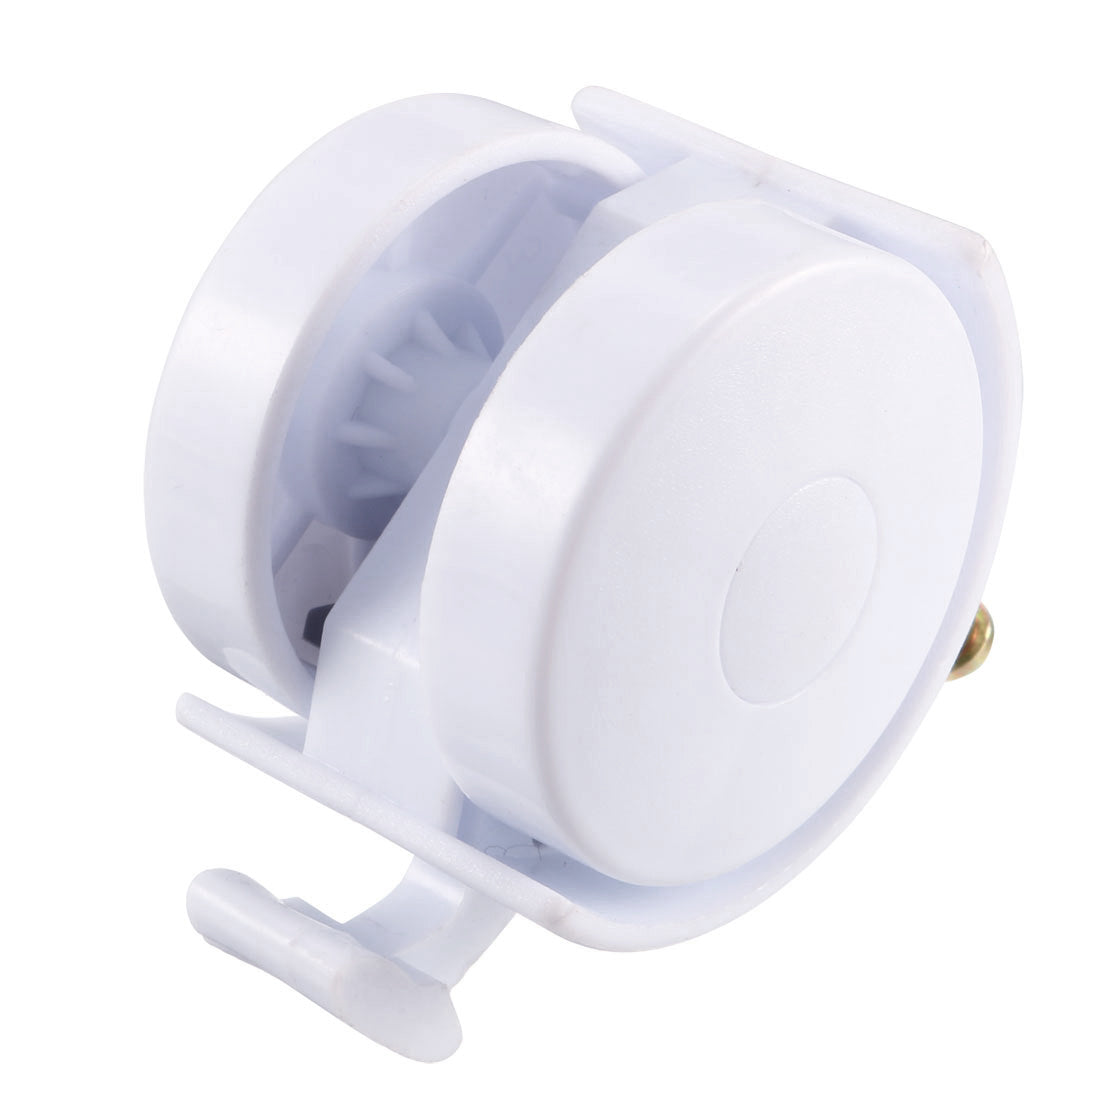 Uxcell Uxcell 1.5 Inch Swivel Caster Wheels Grip Neck Stem Caster White Furniture Wheel with Brake and Mounting Socket